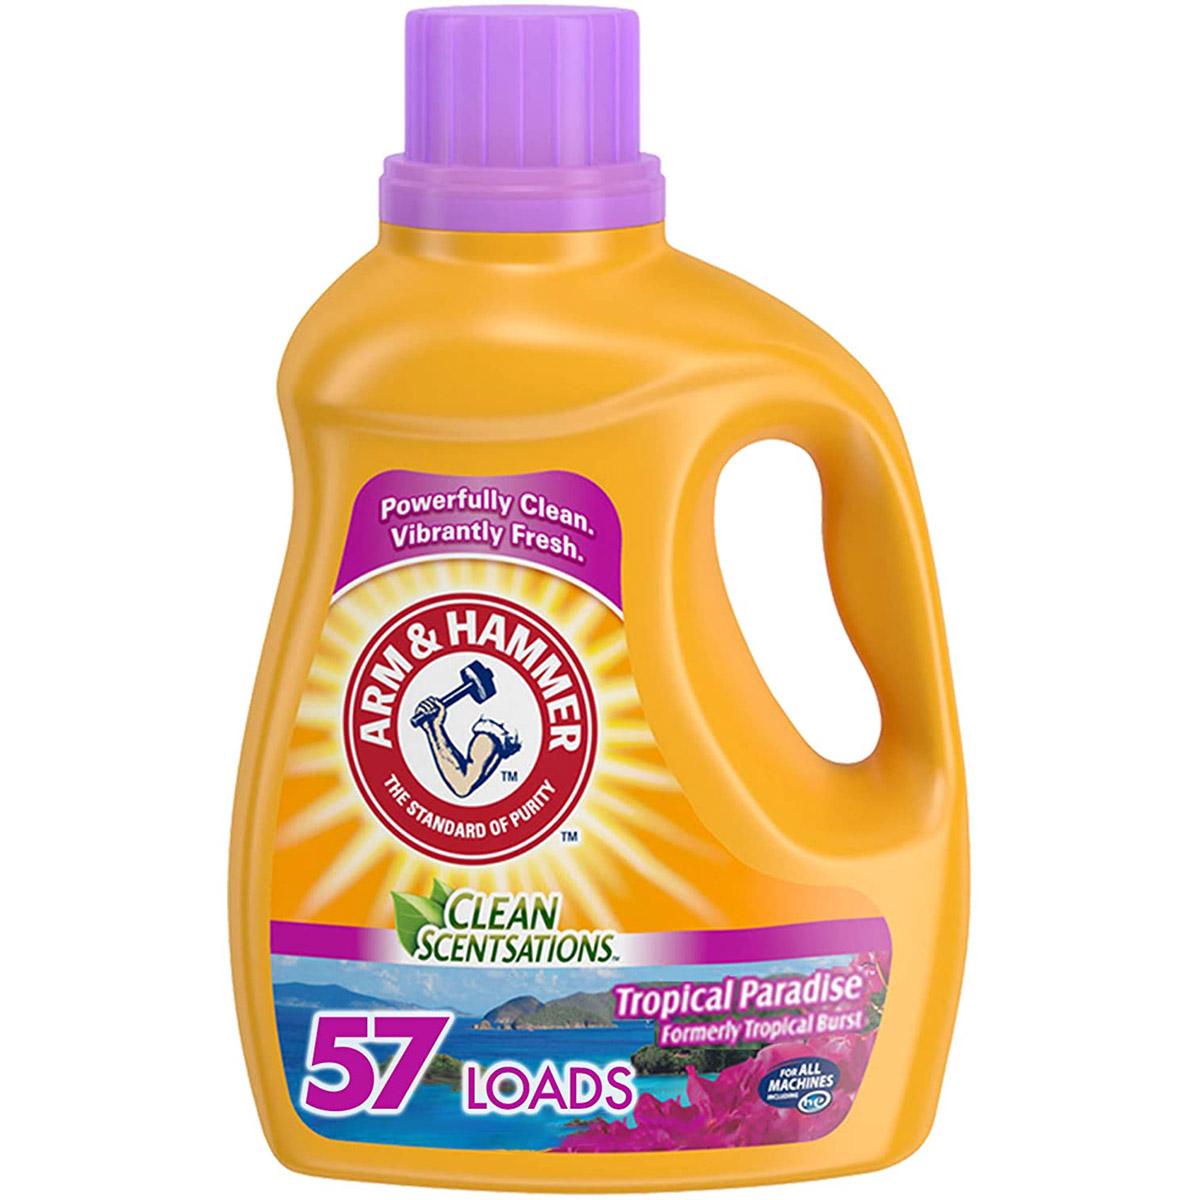 Arm and Hammer Liquid Laundry Detergent for $4.19 Shipped